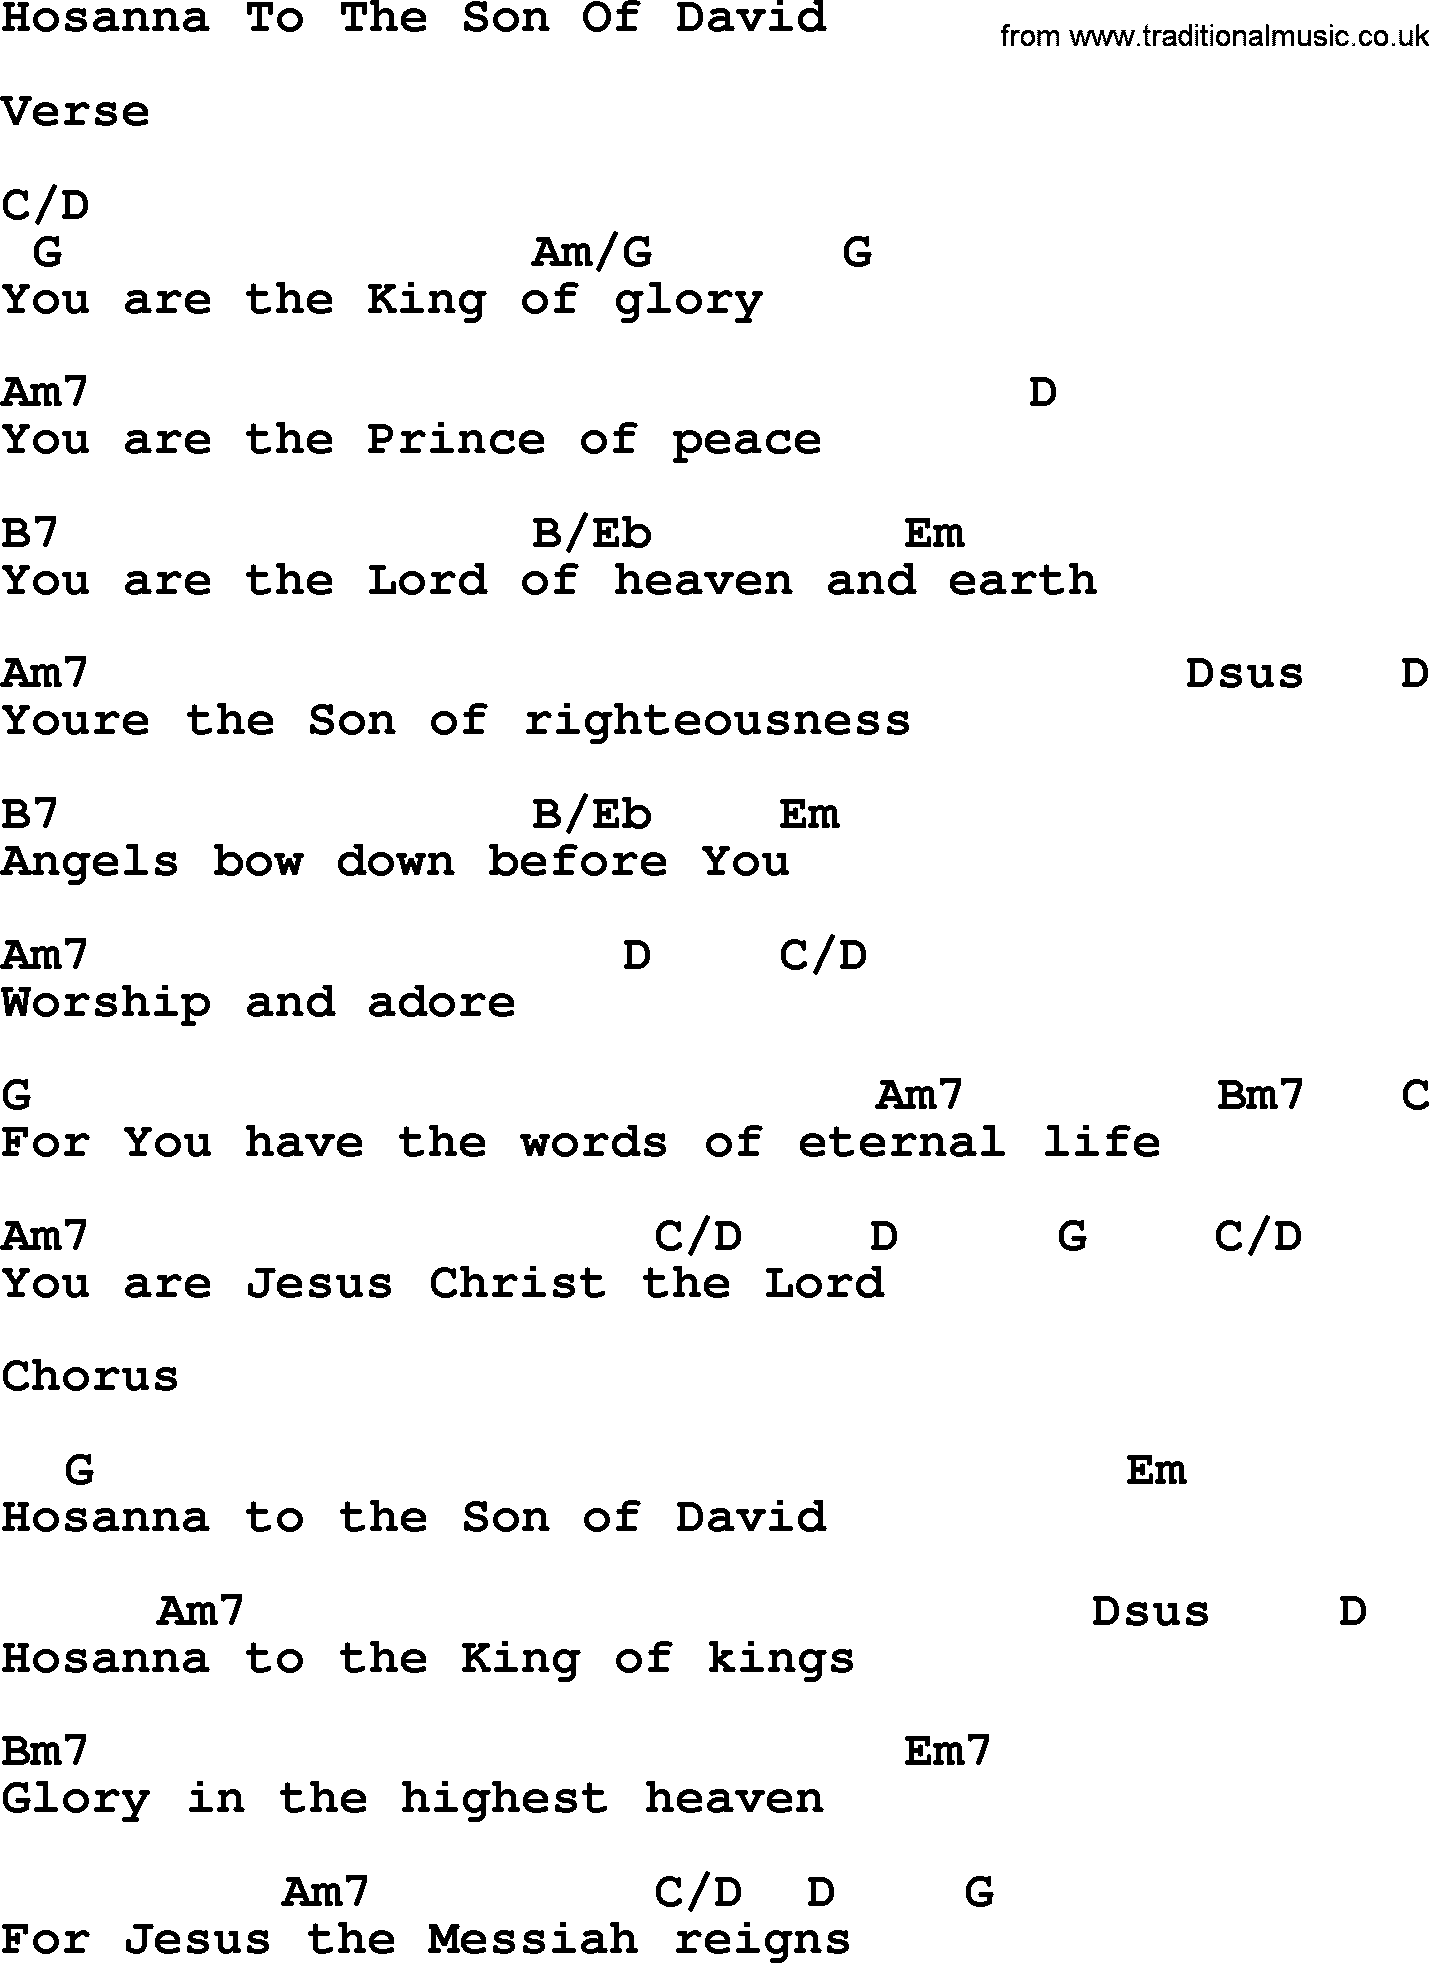 Hymns About Angels Song Hosanna To The Son Of David Complete Lyrics Chords And Pdf